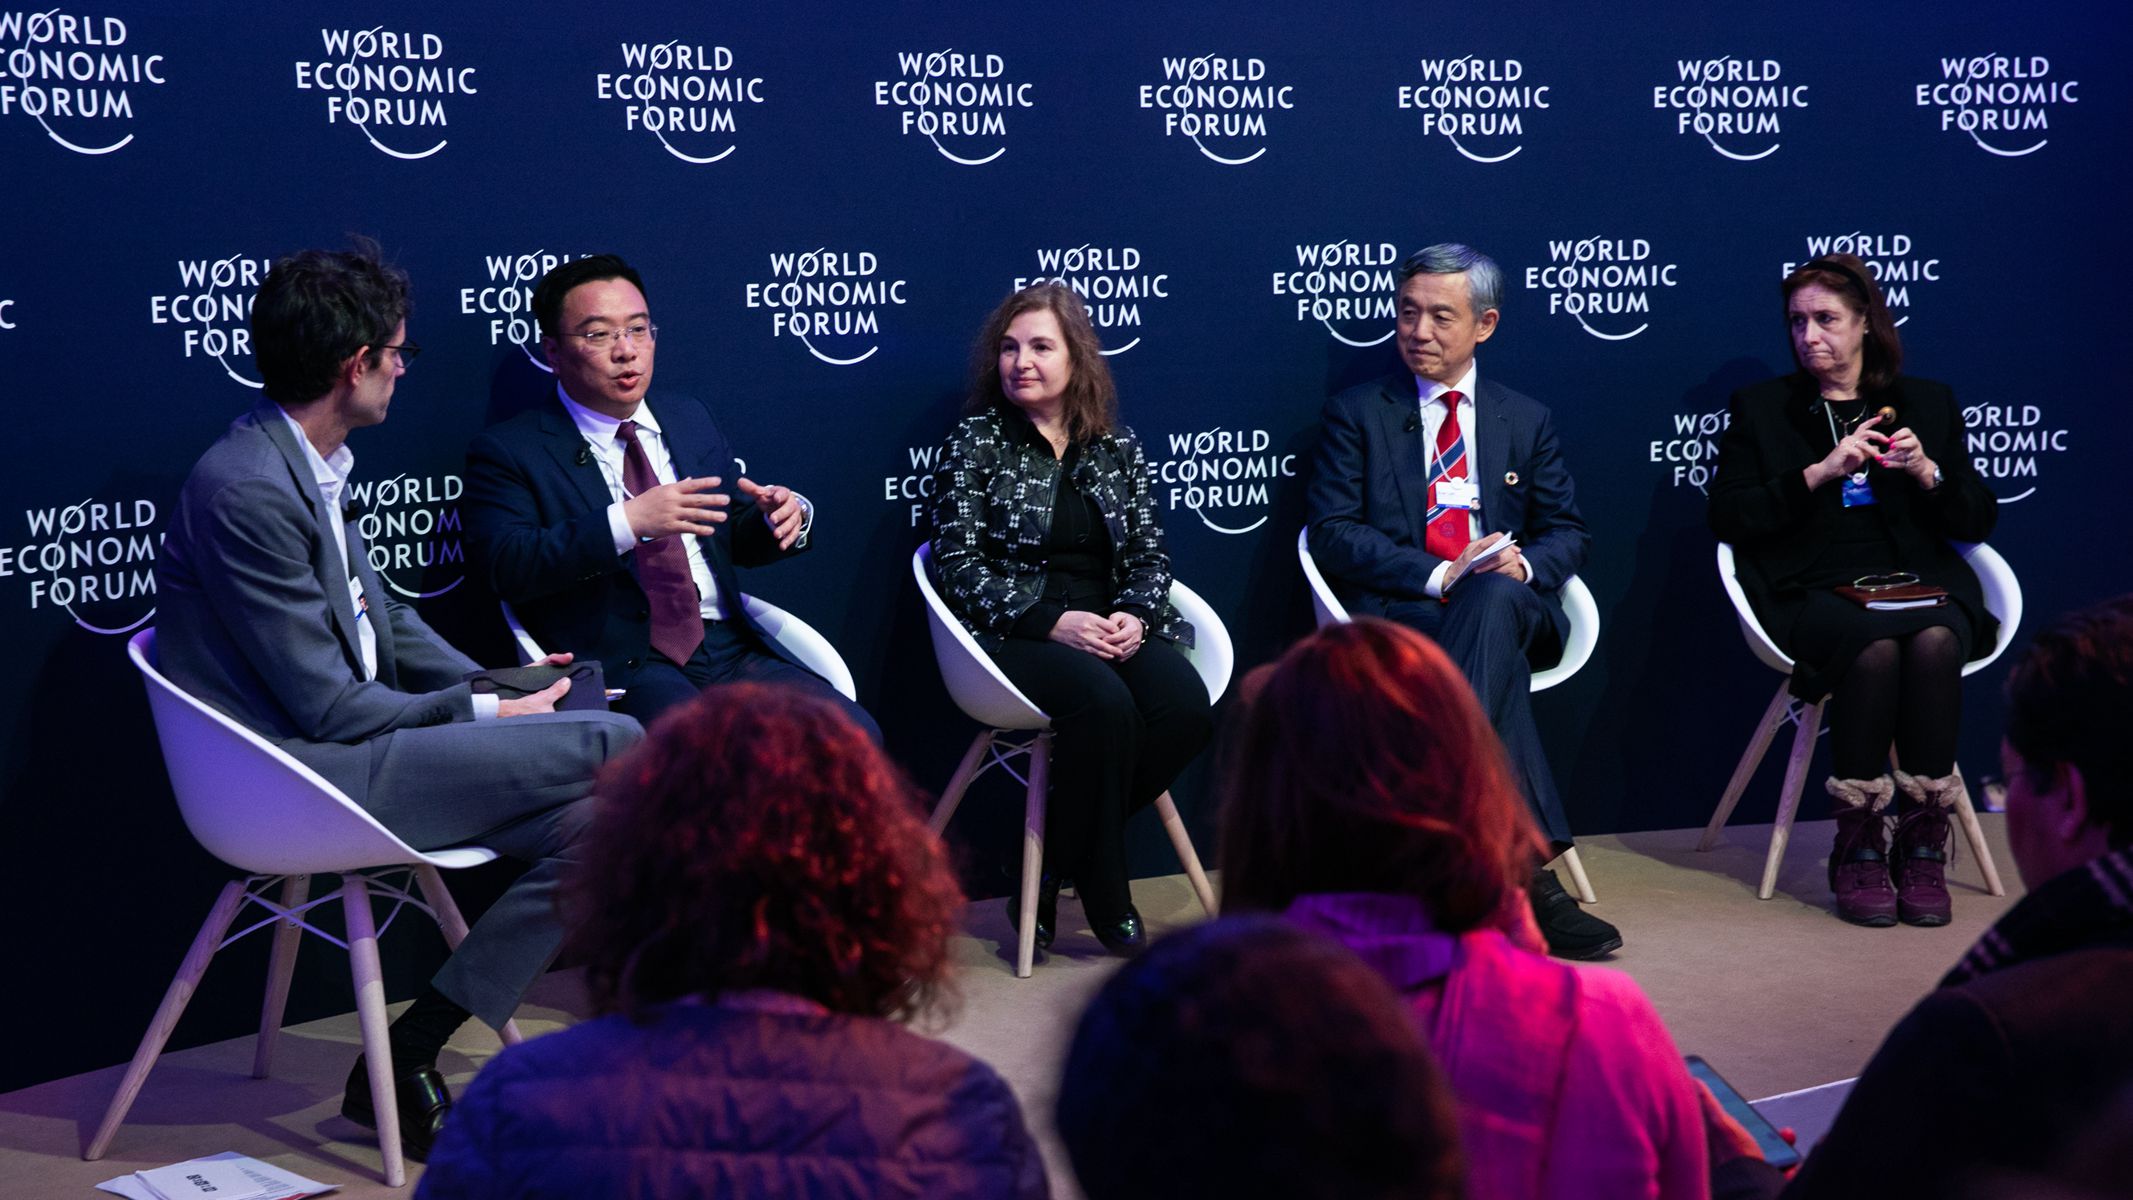 Dr. Bowen Zhou, second from left, at Davos 2020 (Read Dr. Zhou’s article on “Trustworthy AI” from the World Economic Forum’s blog here)